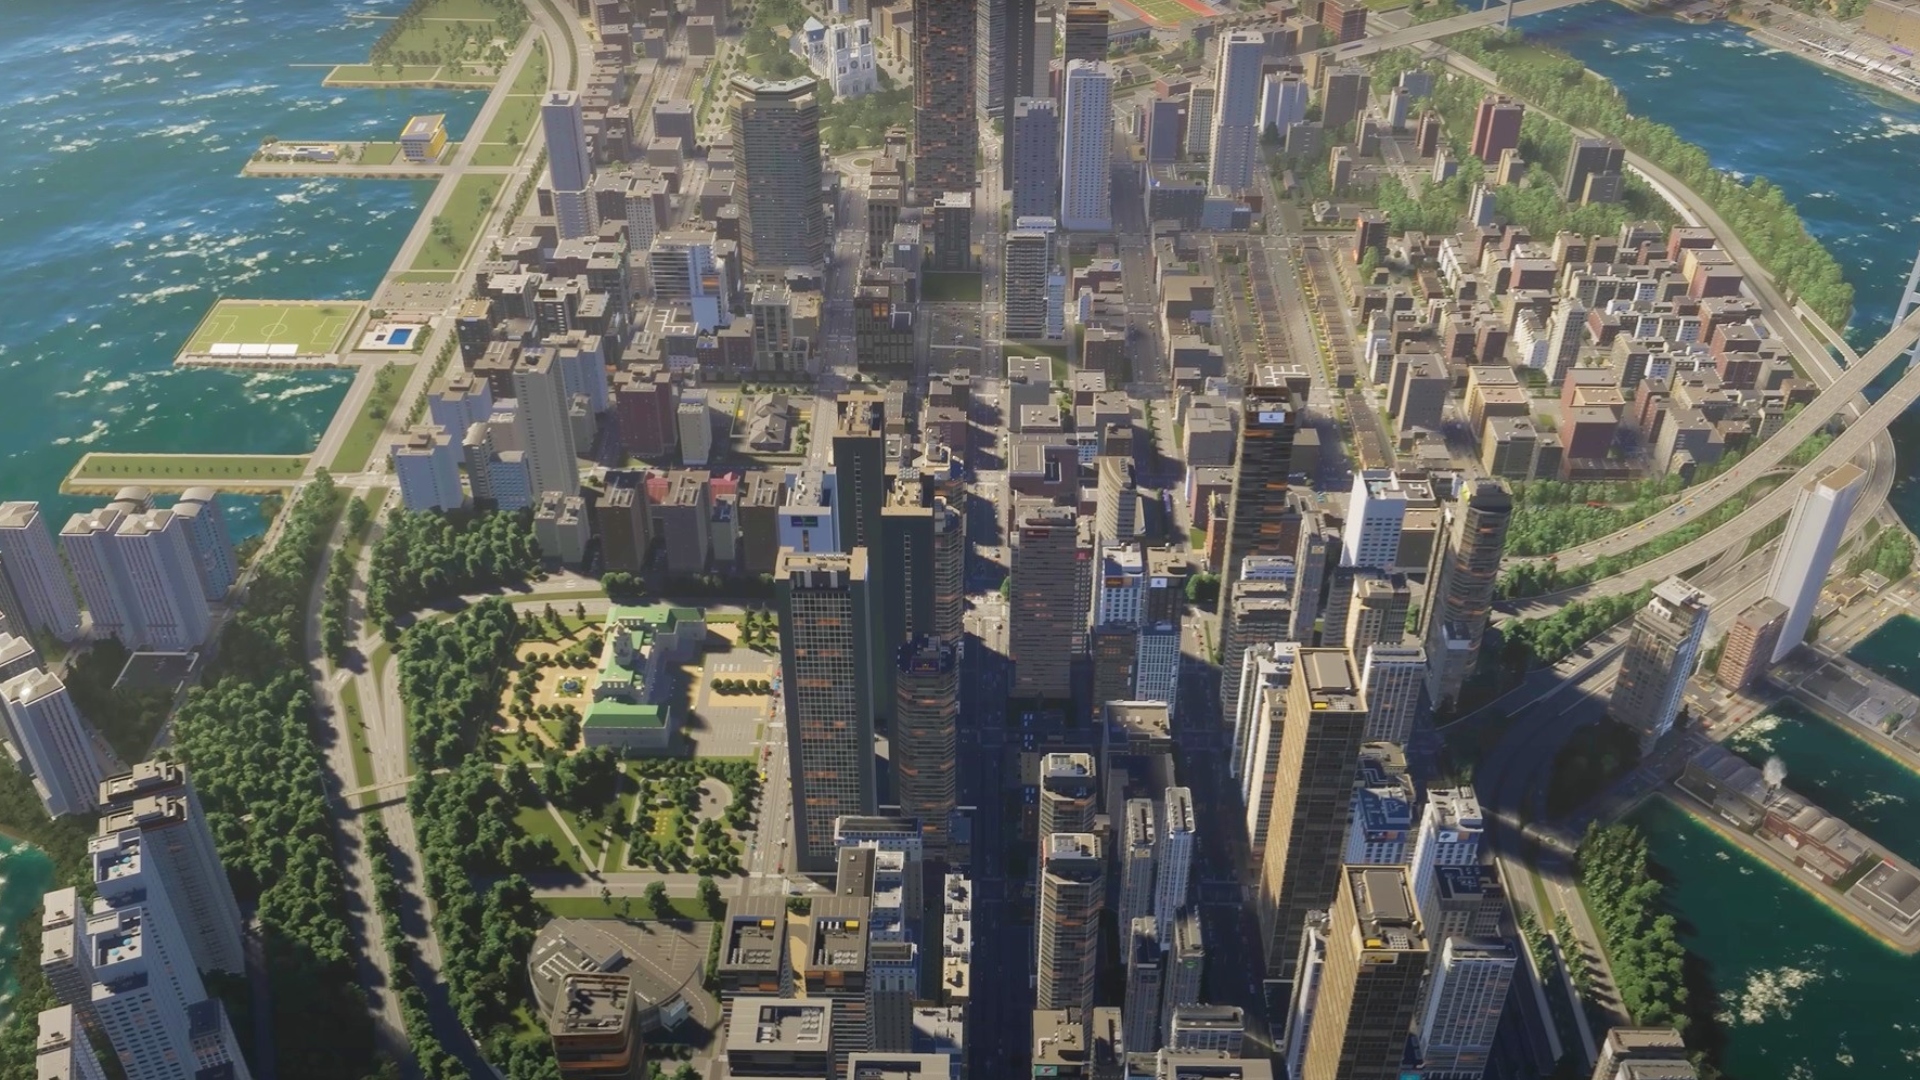 Can You Preload Cities Skylines 2? Platforms and File Size - N4G